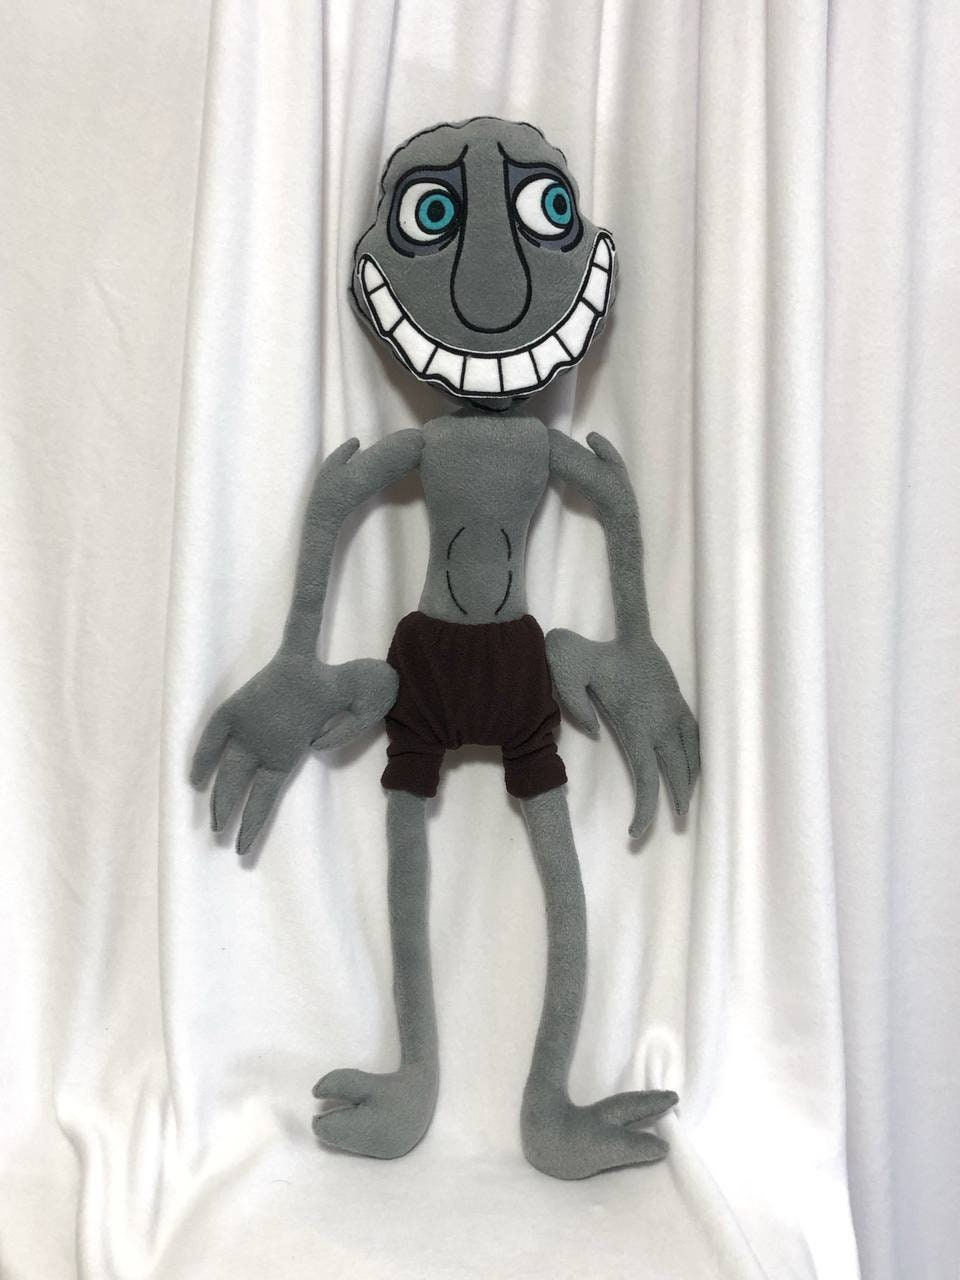 40cm The Man From The Window Plush Toy Horror Games Cartoon Gray